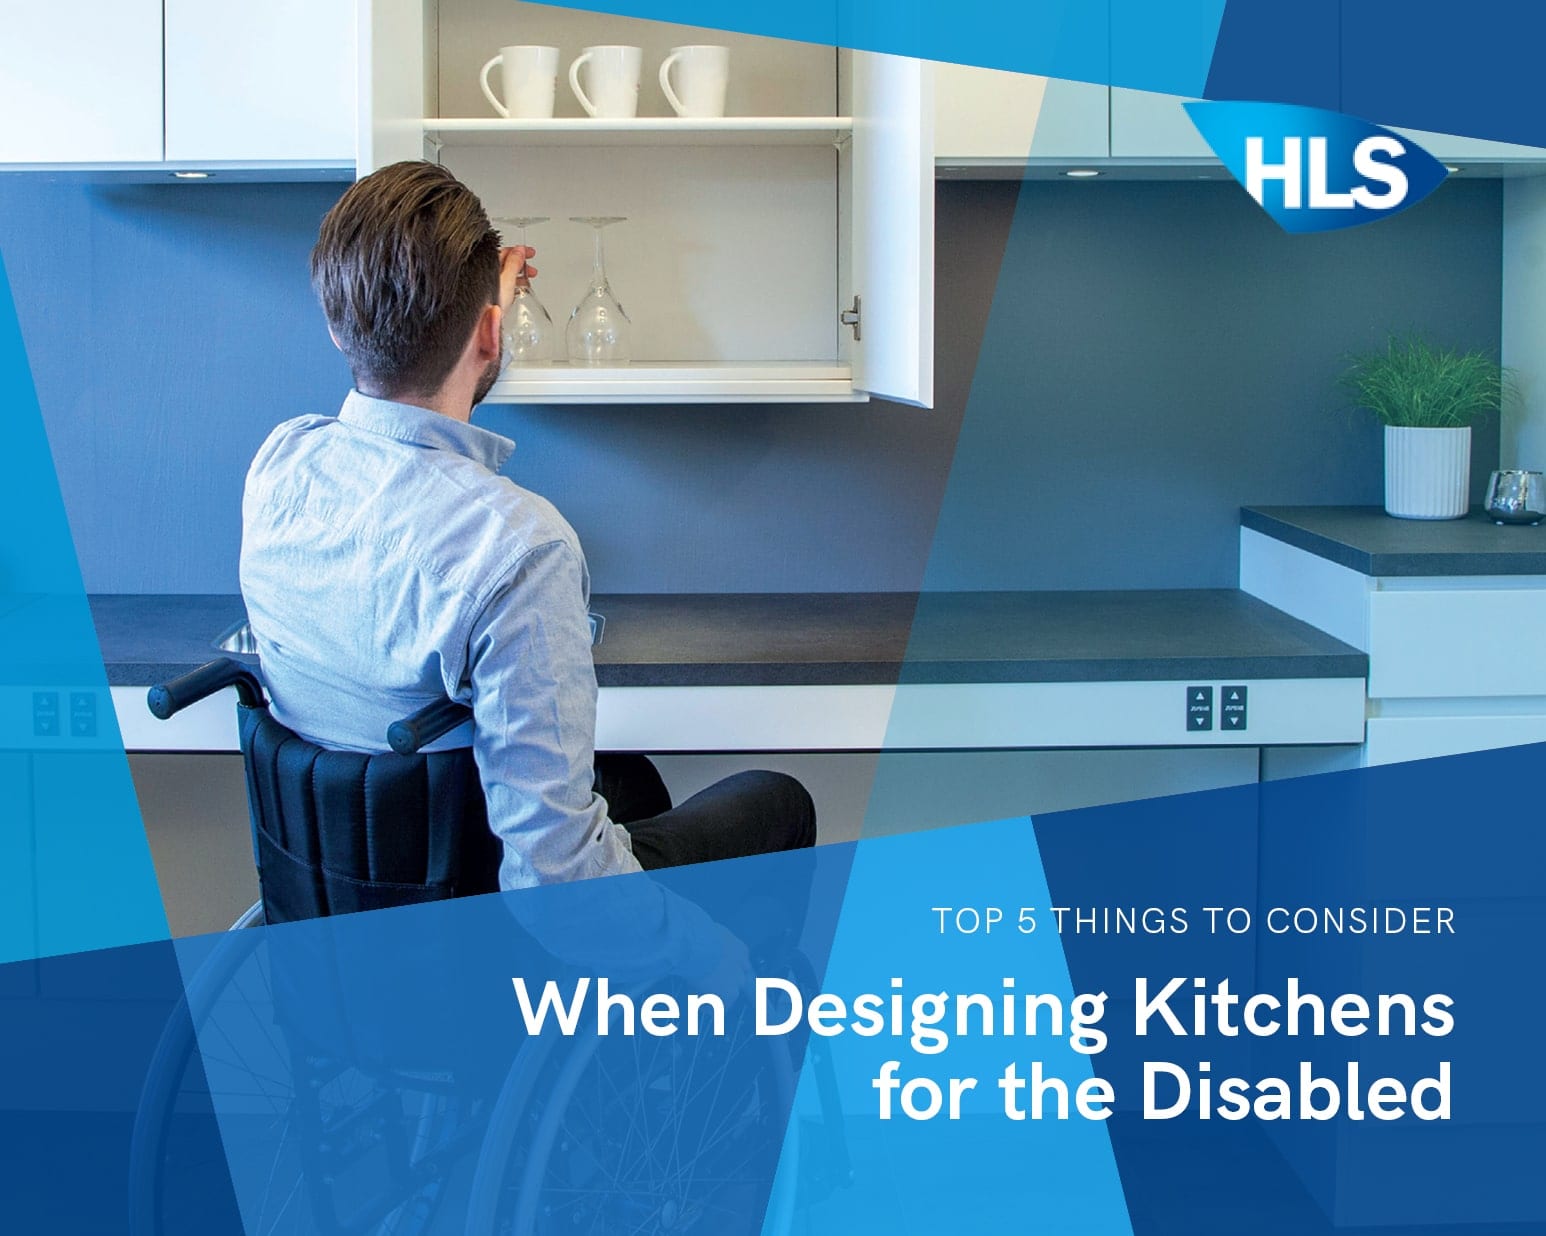 38 Top 5 Things Consider Kitchens Disabled 773x618 X2 